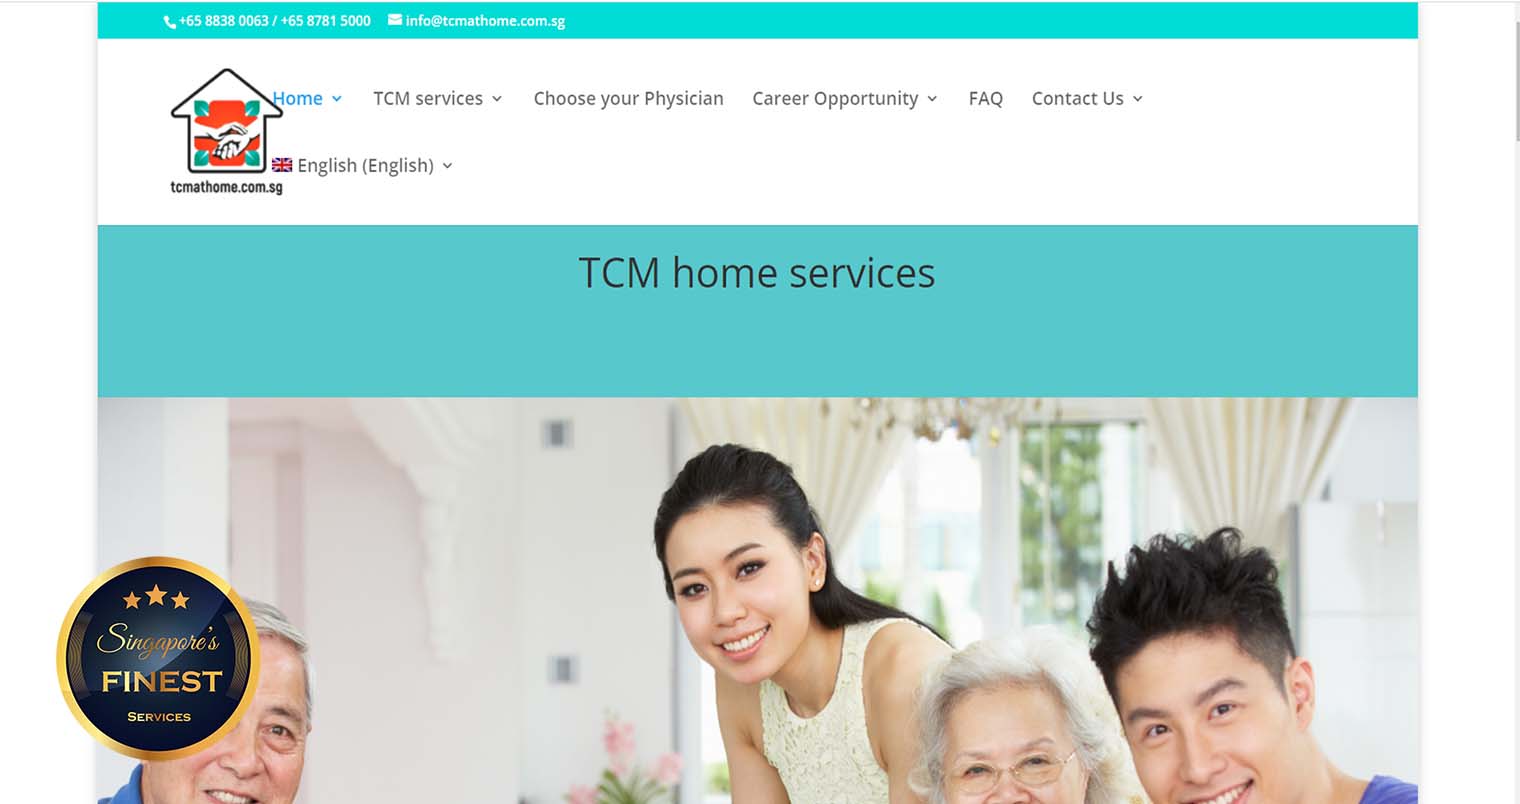 TCM at Home Services - TCM Clinic in Singapore